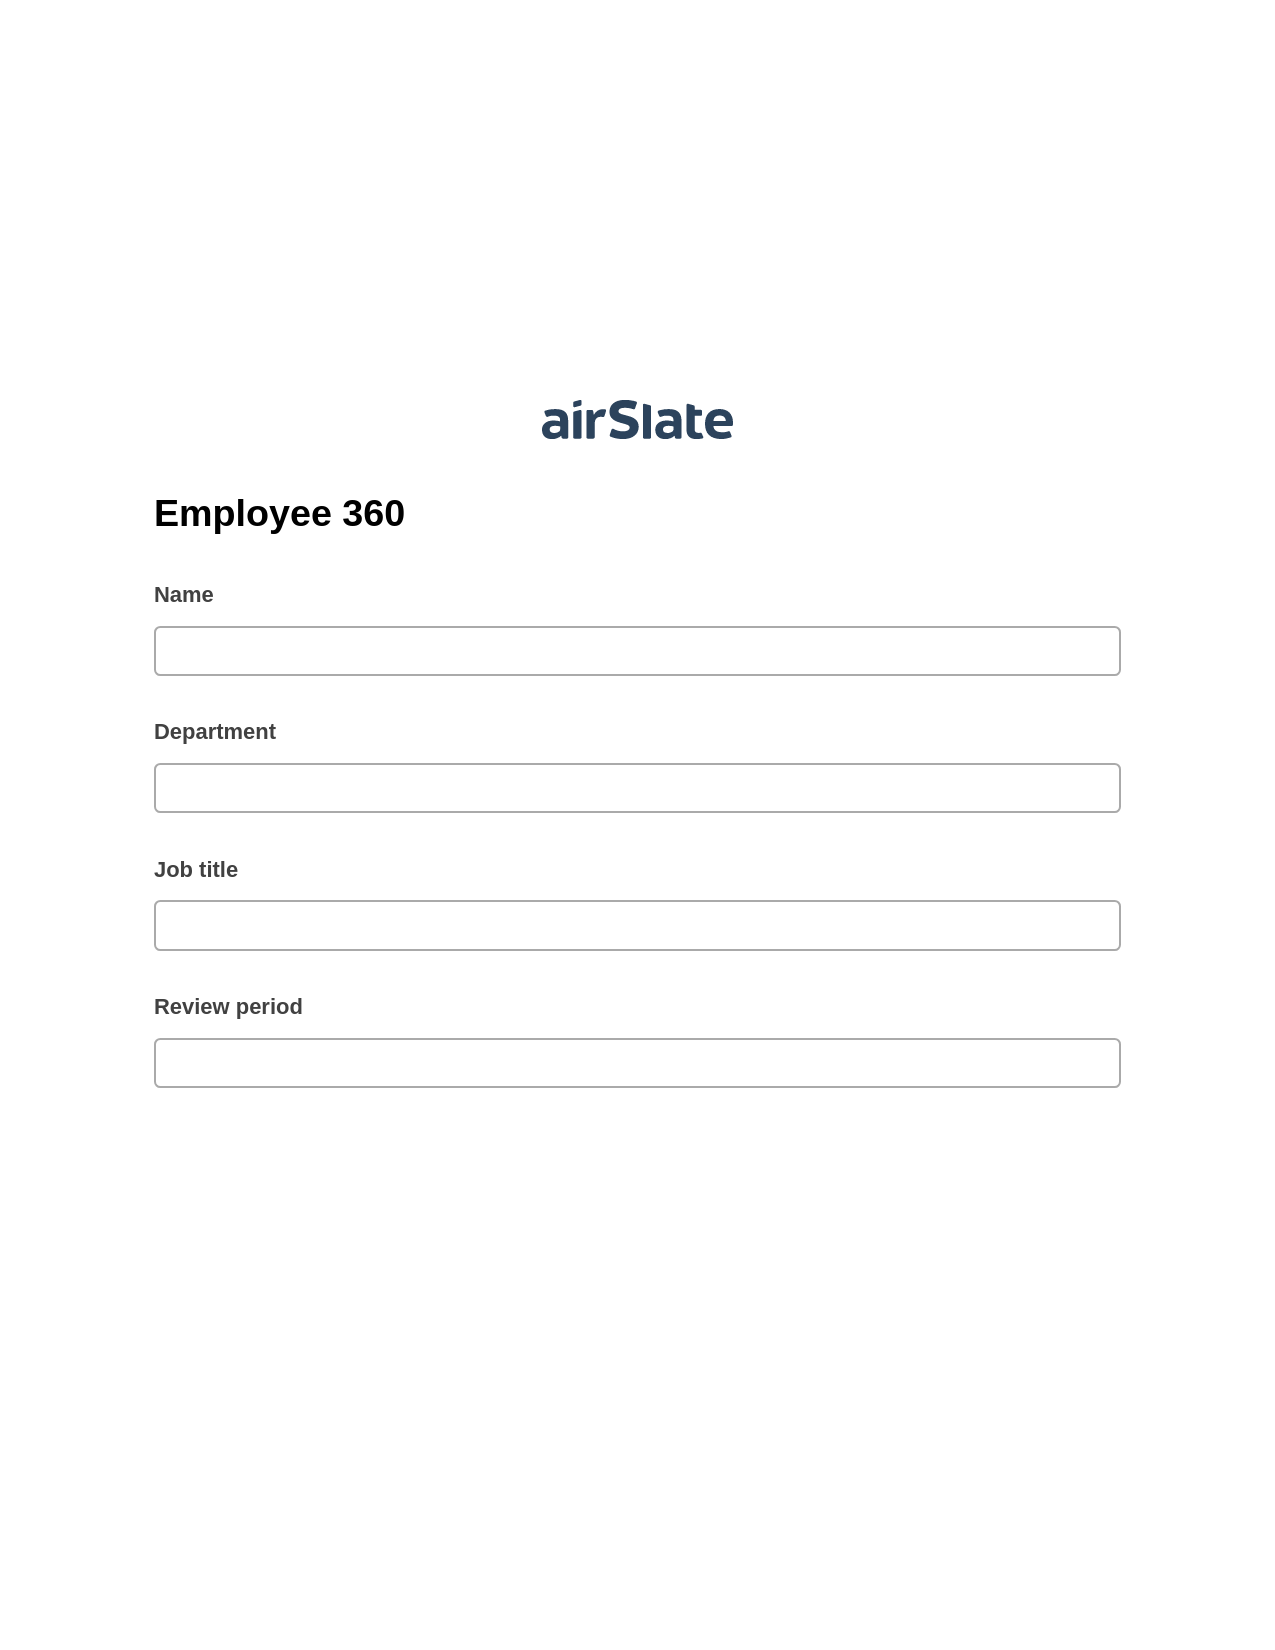 Employee 360 Pre-fill from CSV File Bot, Update MS Dynamics 365 Record Bot, Export to MySQL Bot